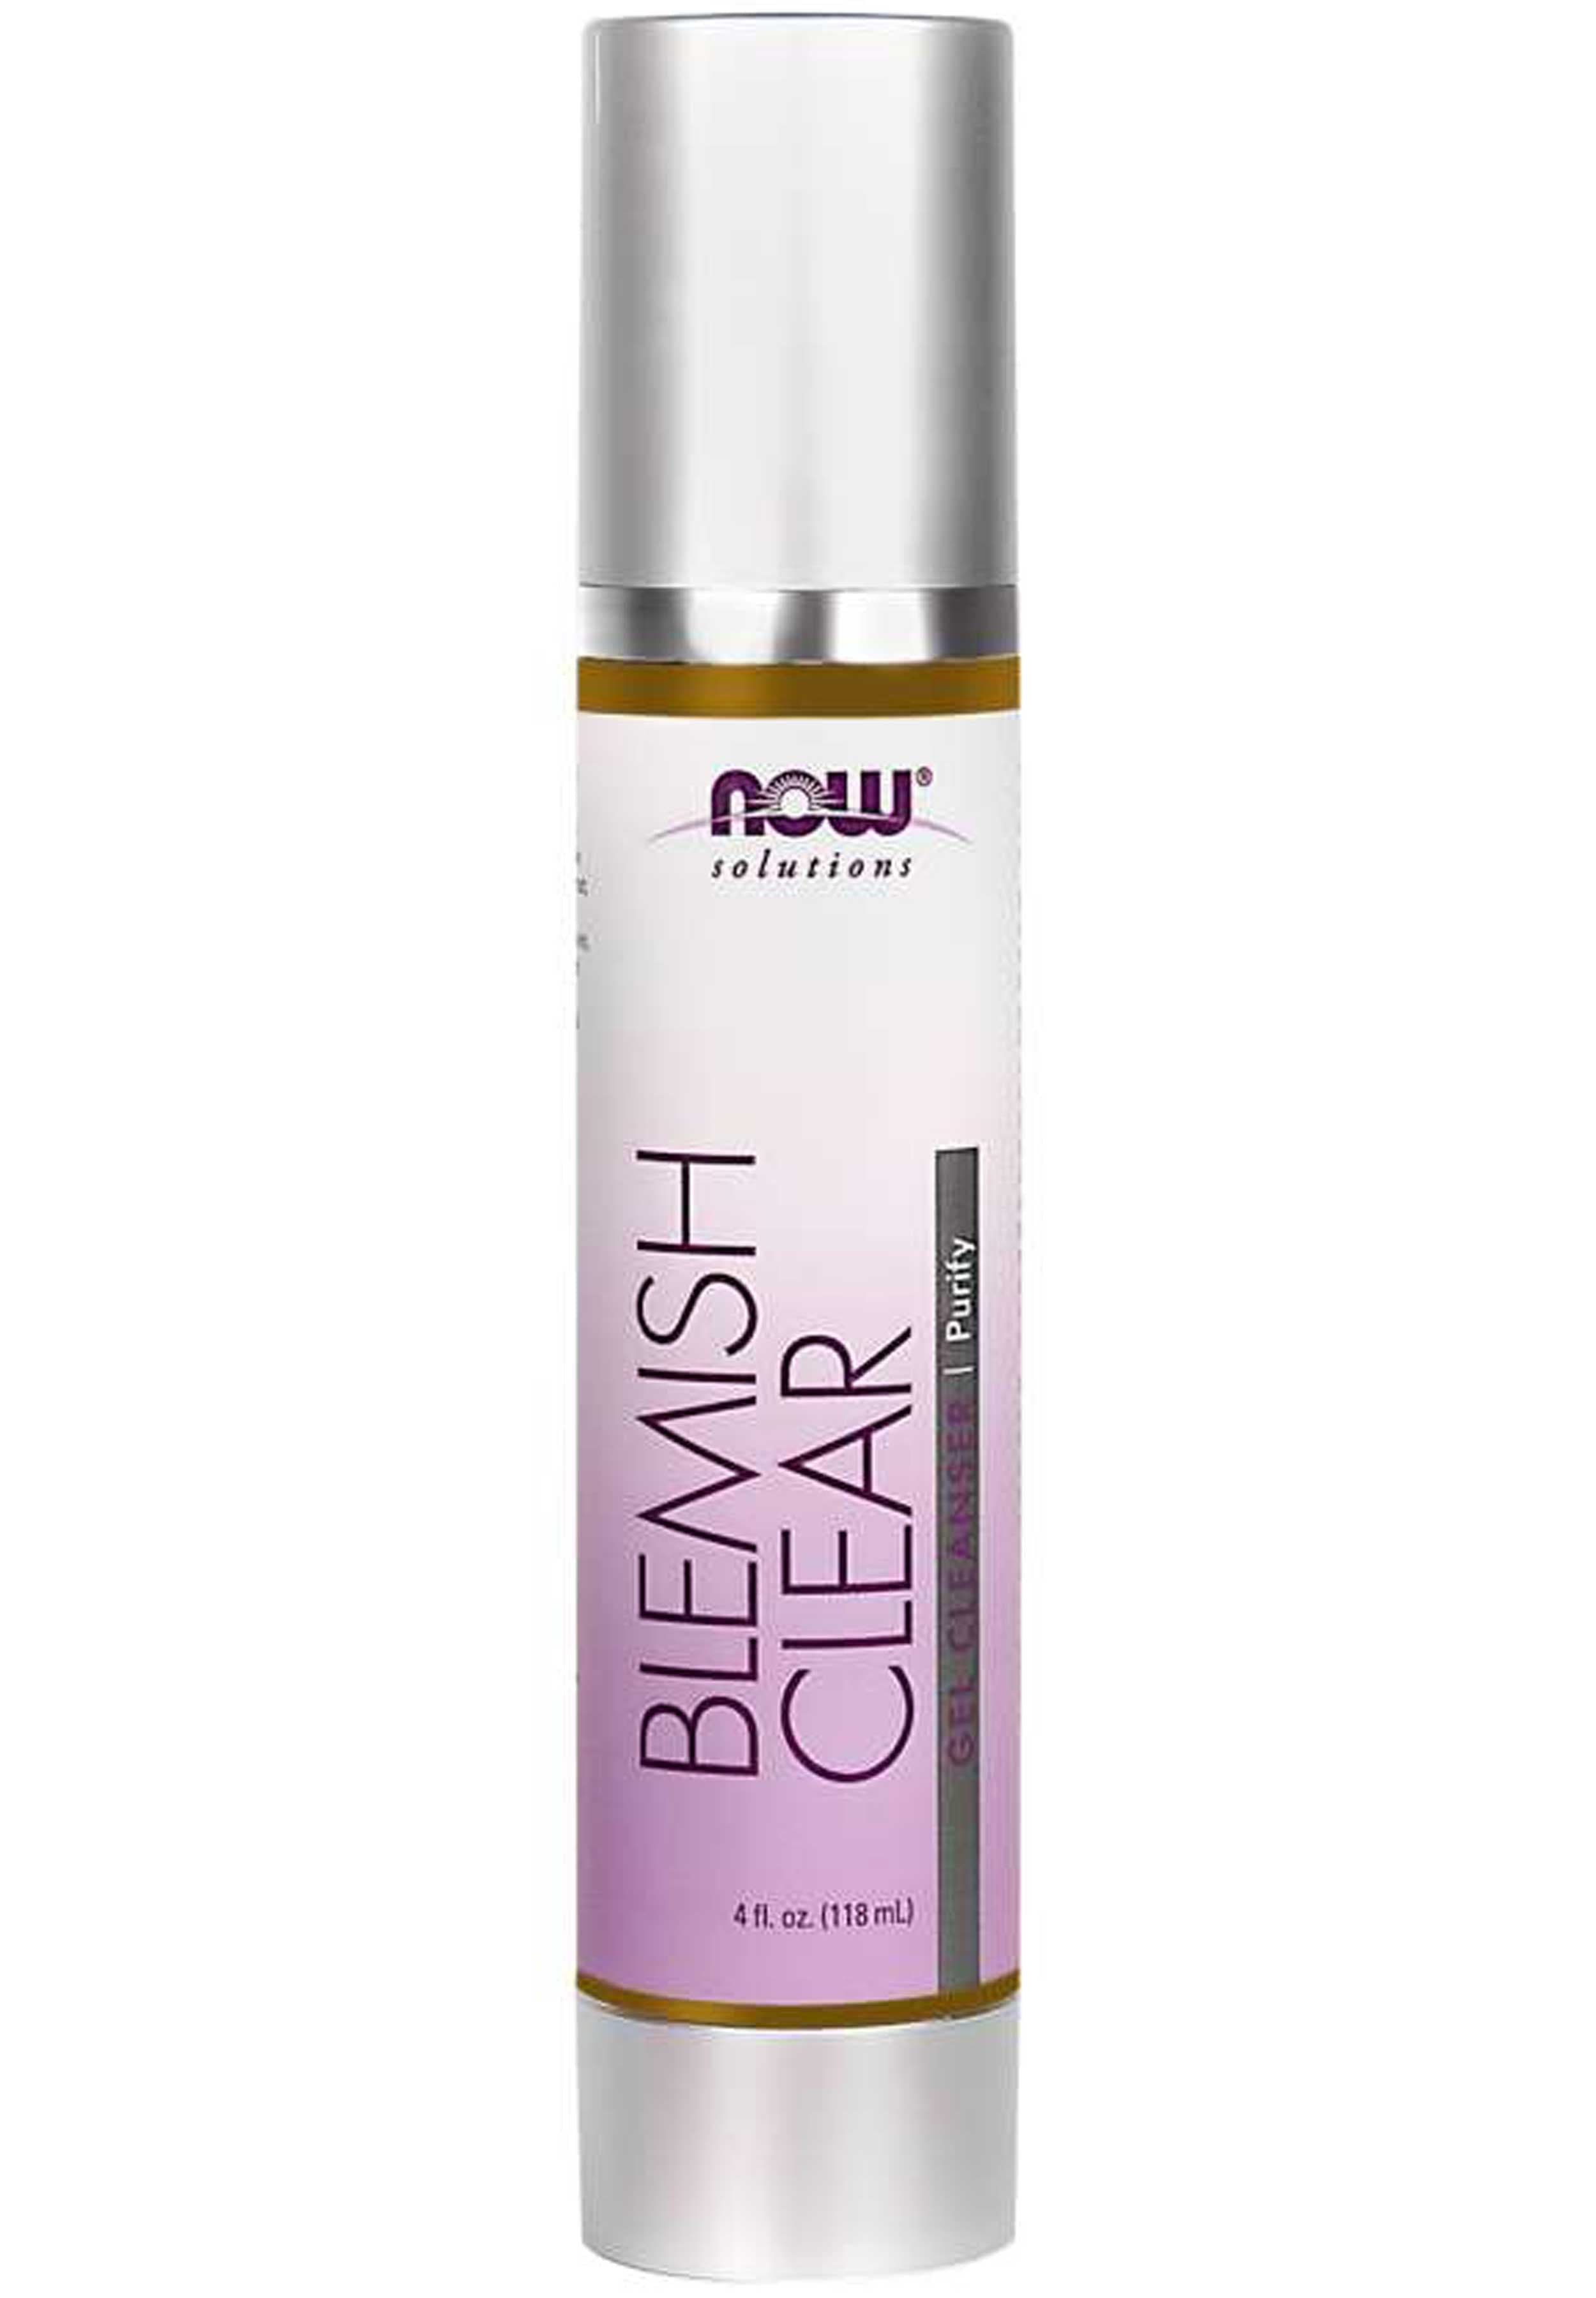 NOW Solutions Blemish Clear Gel Cleanser